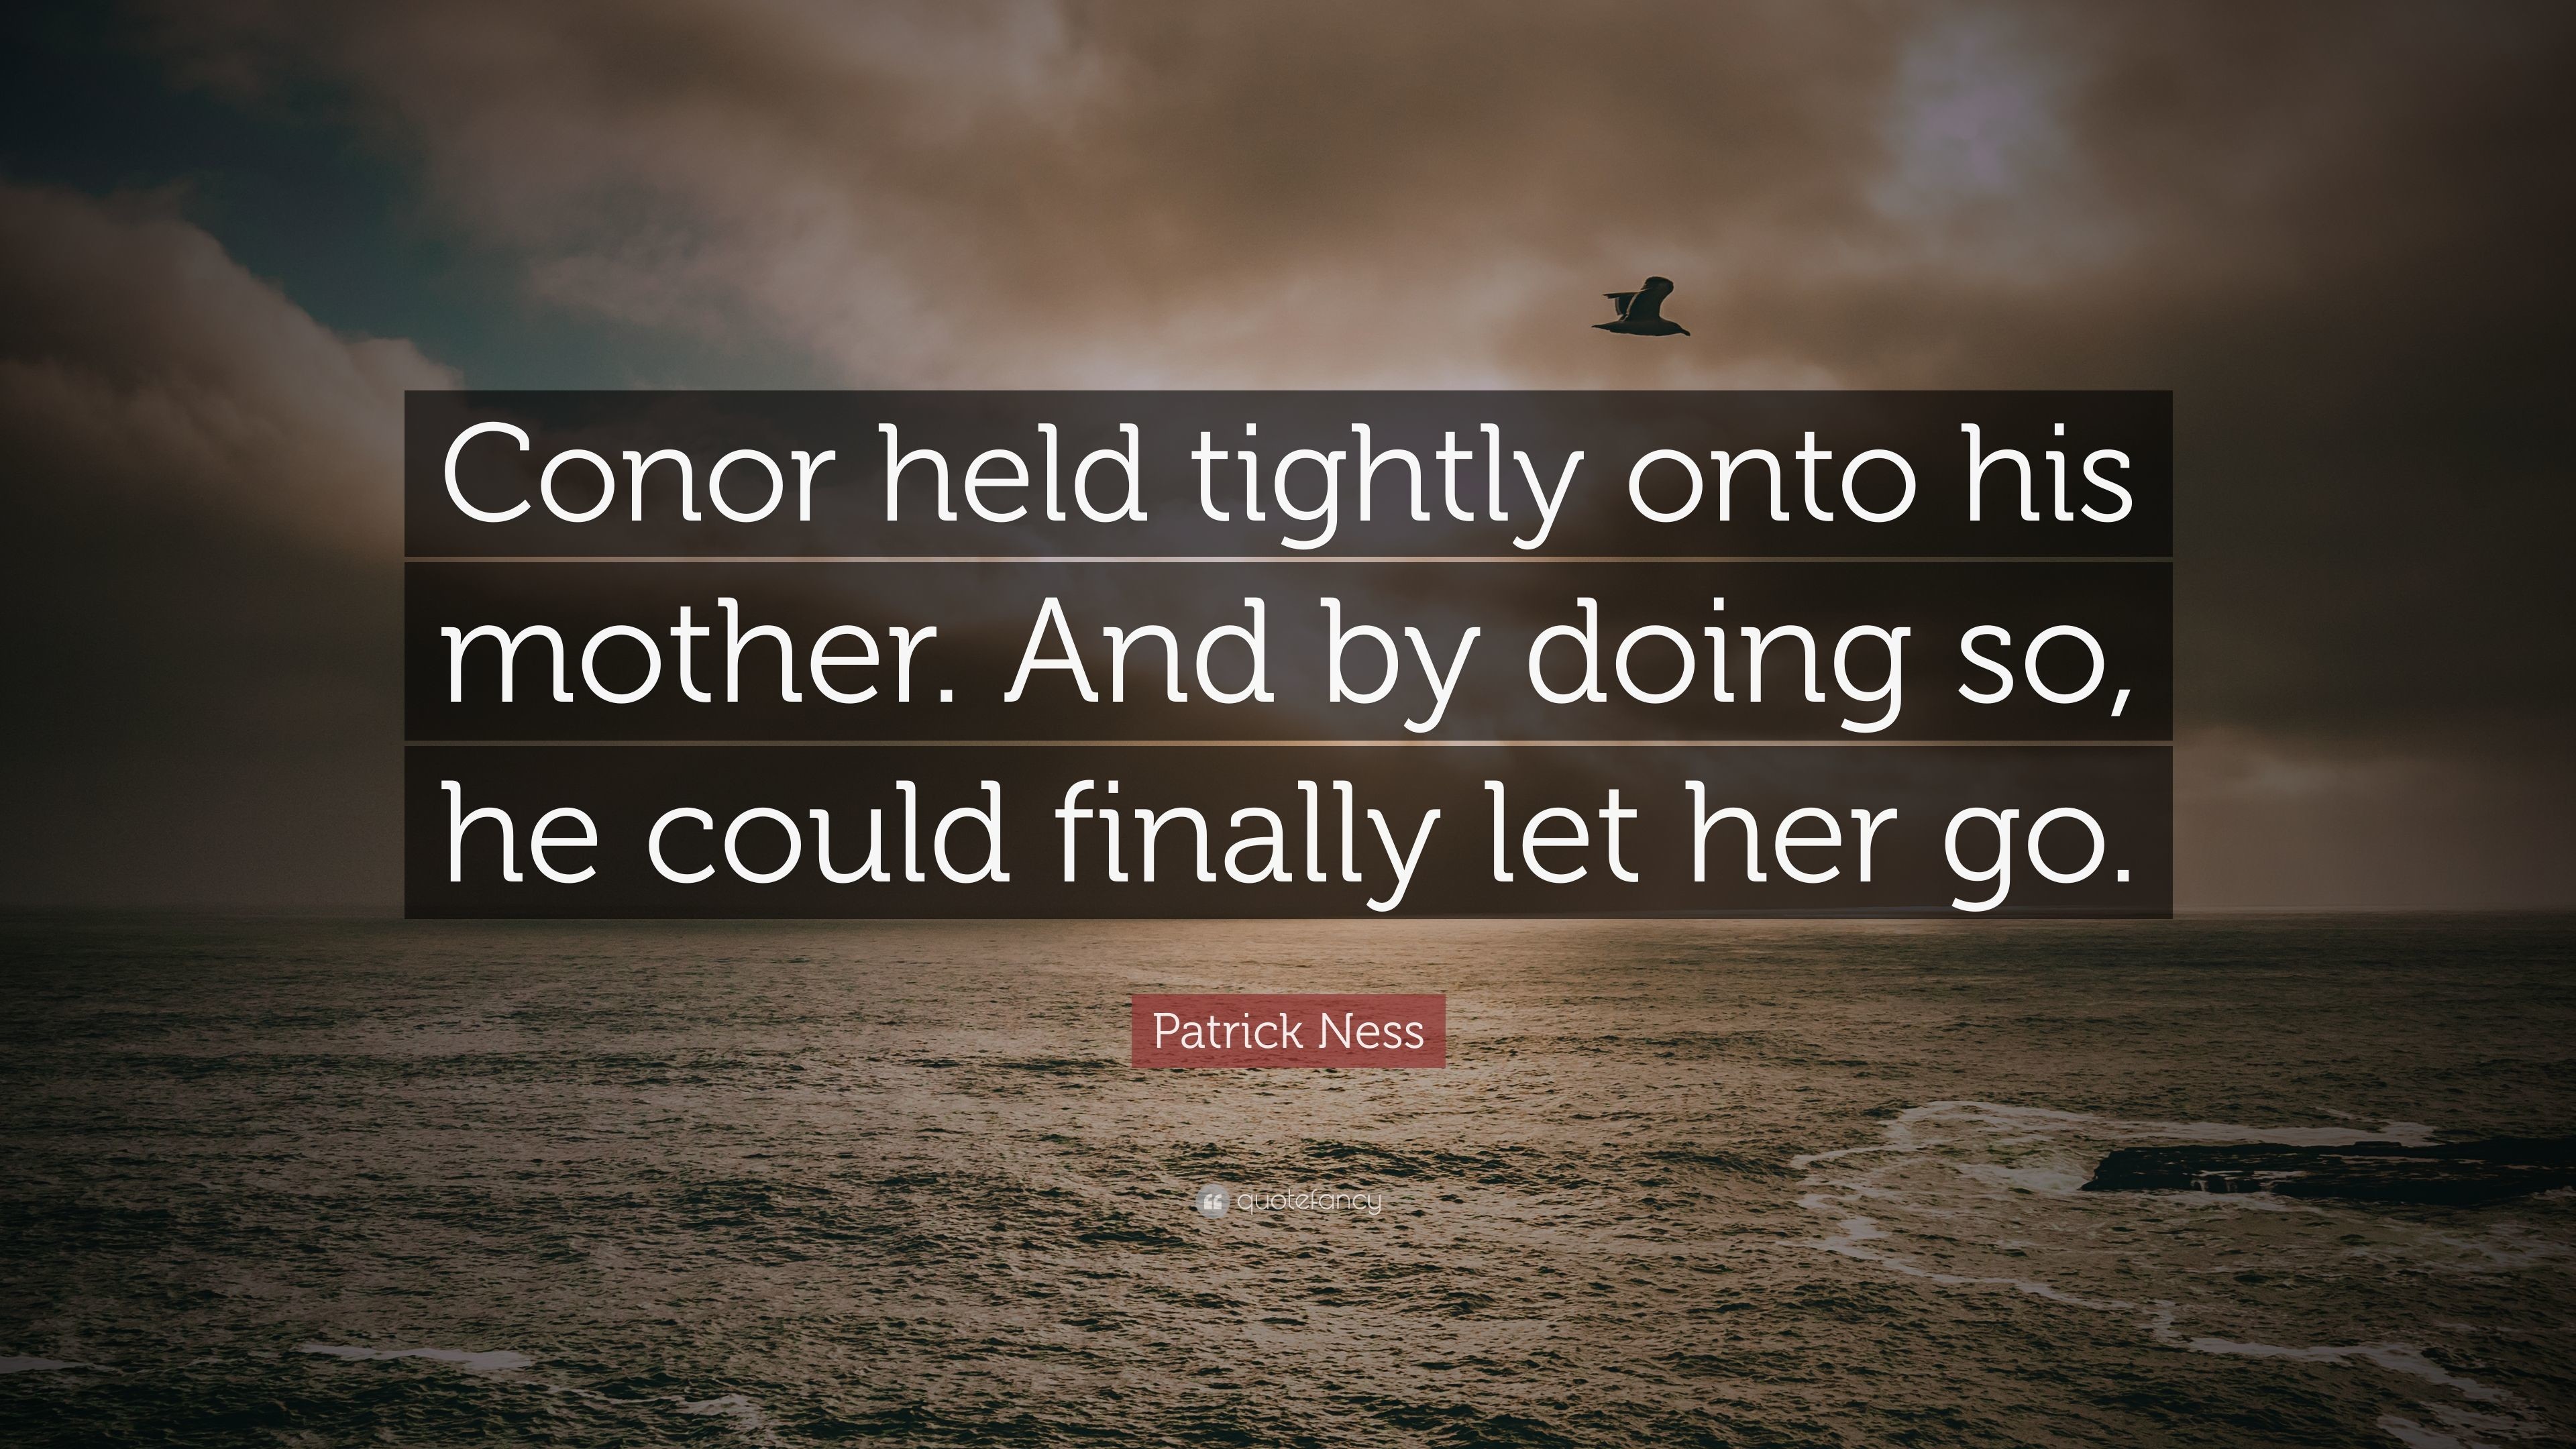 3840x2160 Patrick Ness Quote: “Conor held tightly onto his mother. And by doing so